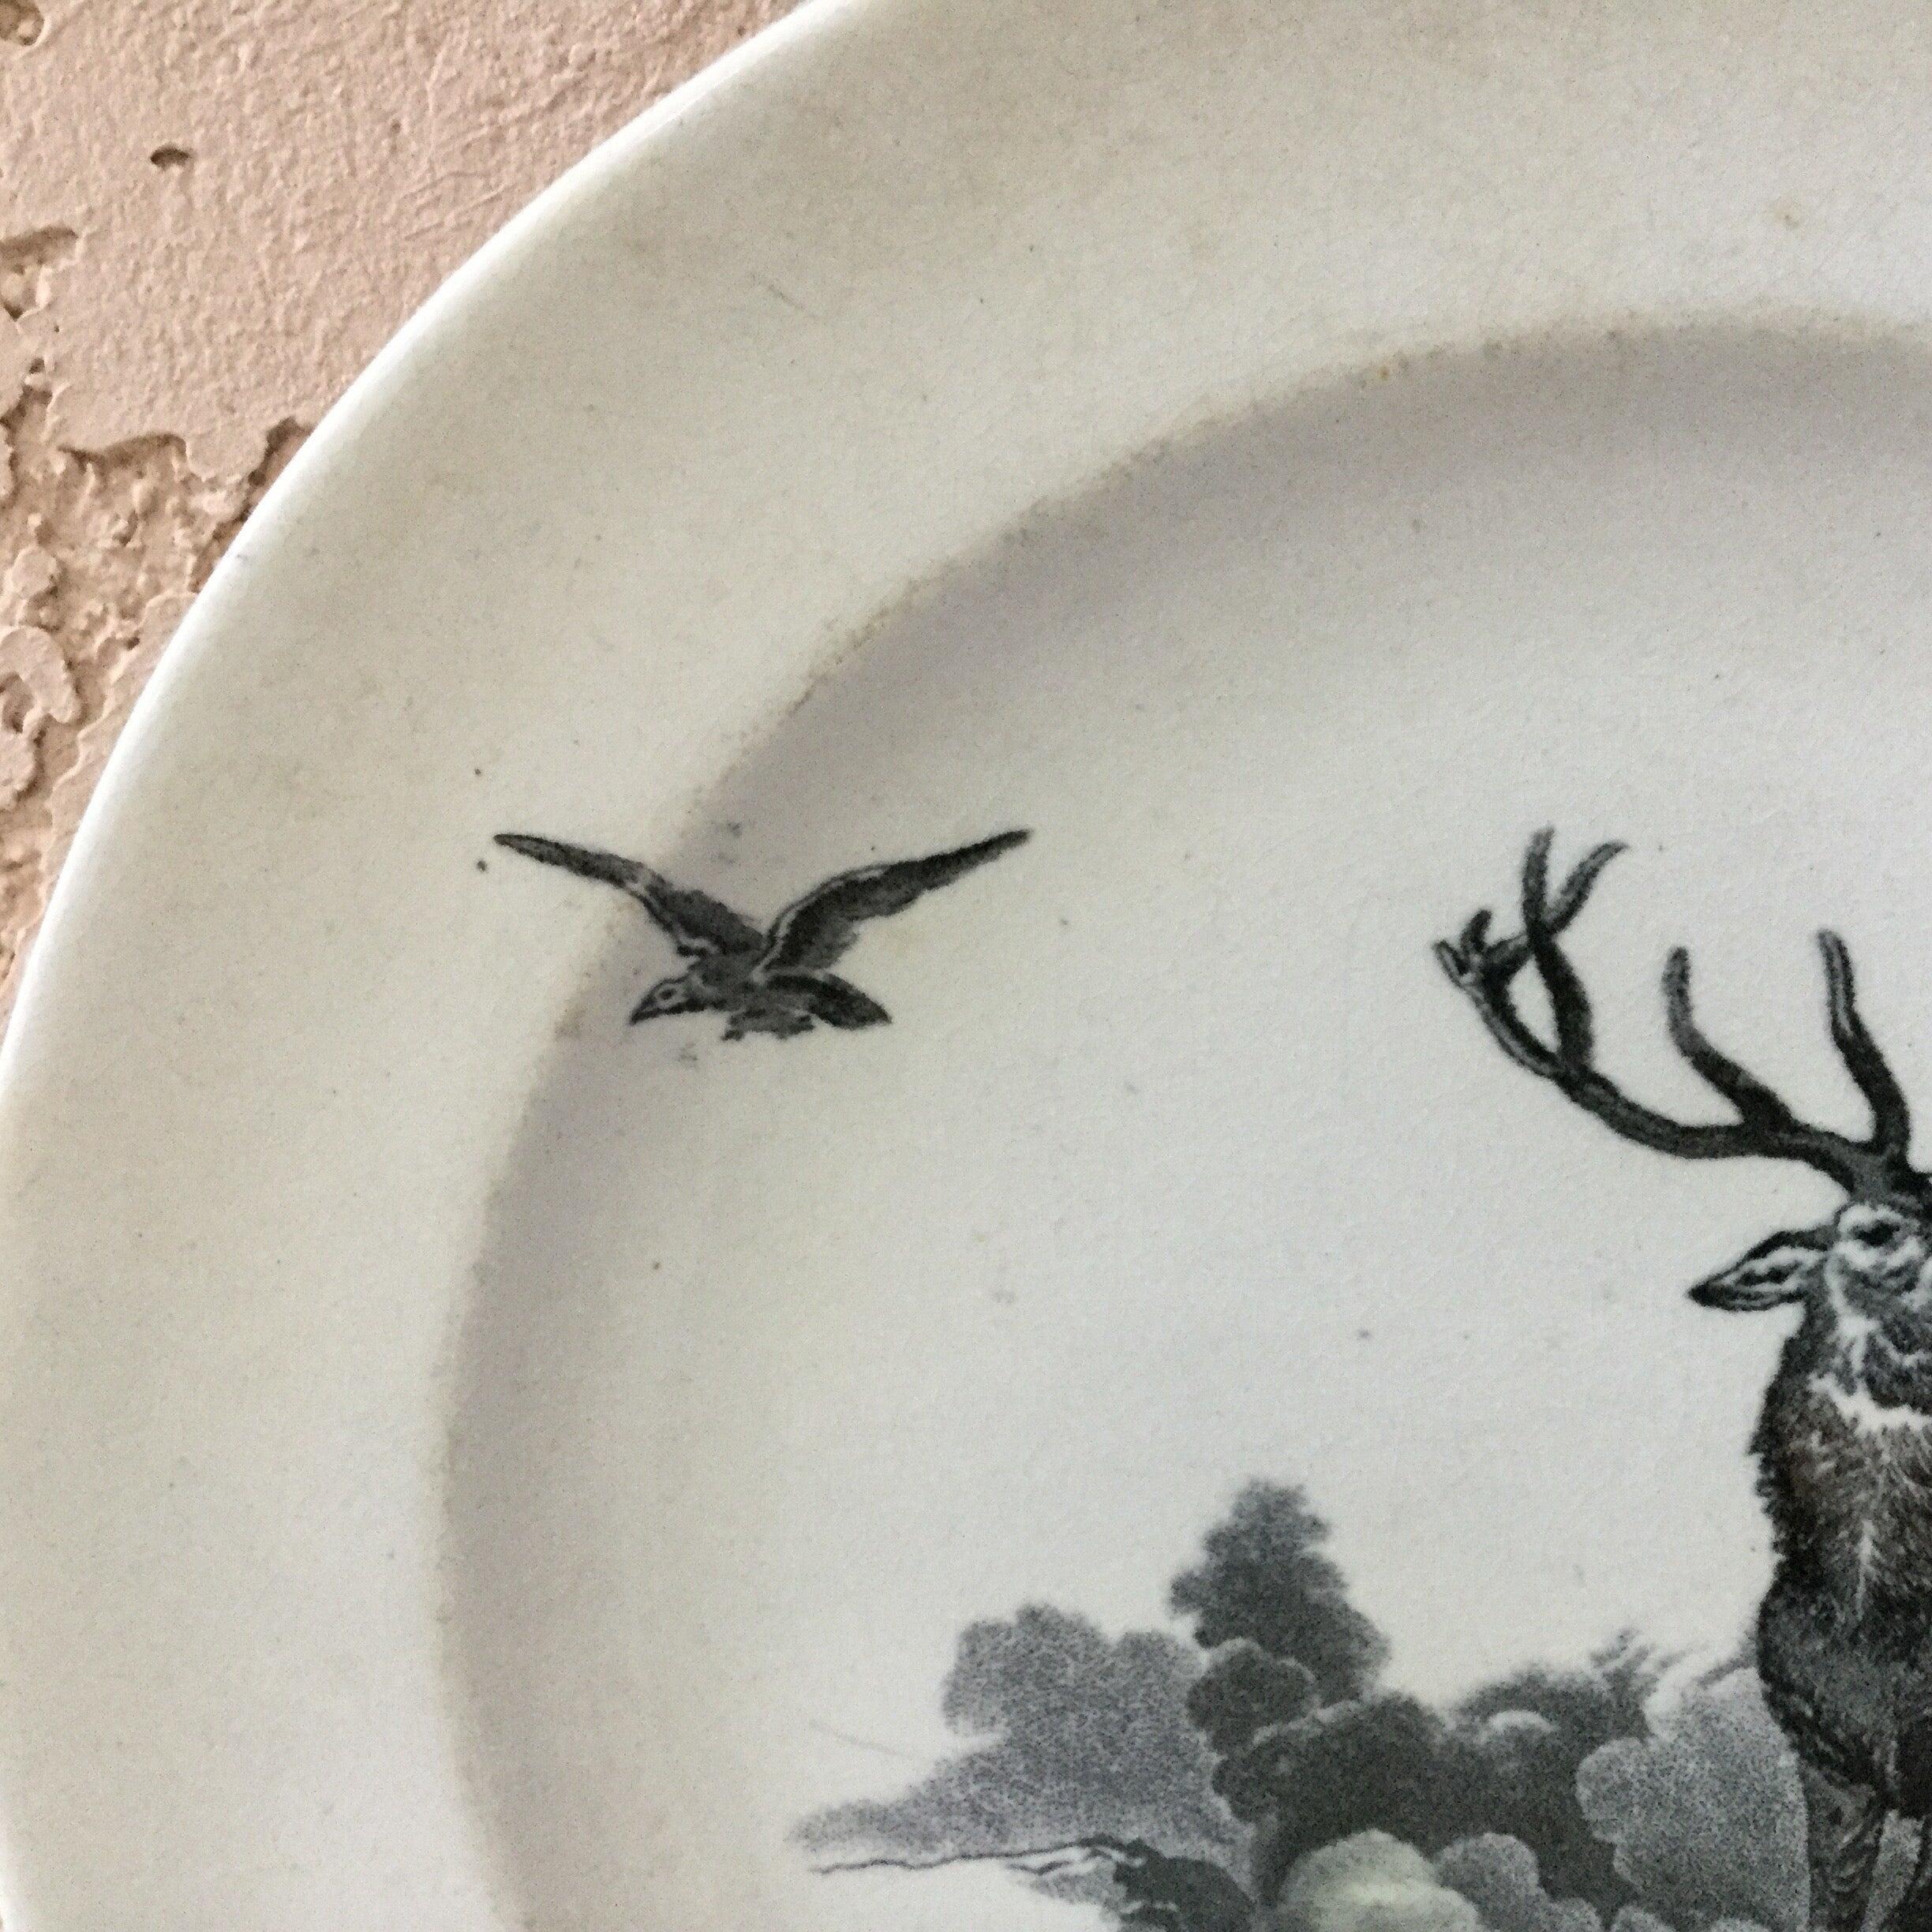 English faience hunt plate signed brownfield, circa 1875.
Hunt scene with mountain landscape, bird and deer.
Monarch of the Glen.